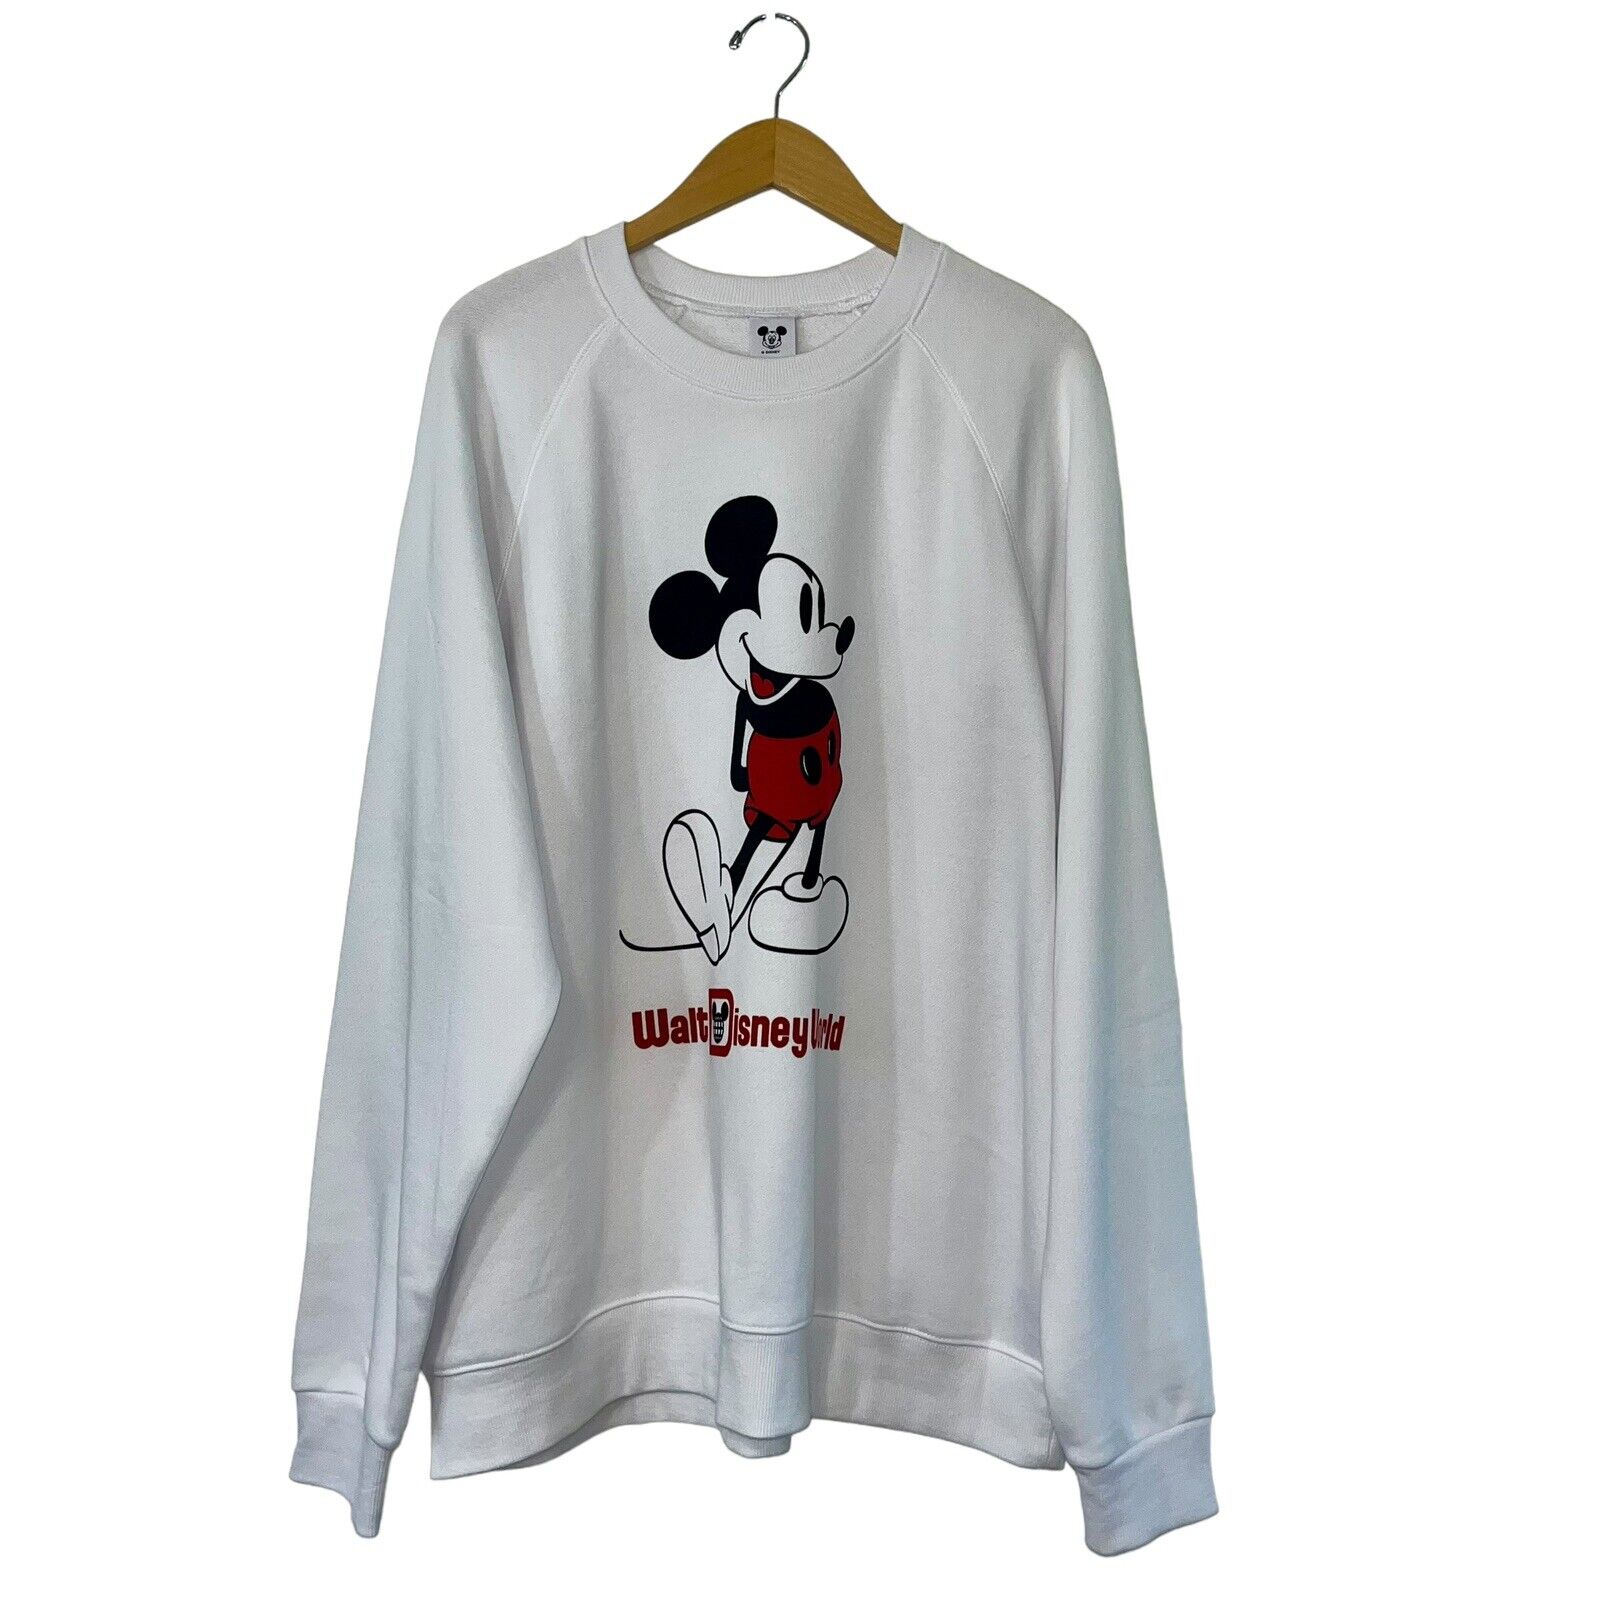 NWT Disney Parks WDW Mickey Mouse Classic Sweatshirt for Adults In White XL